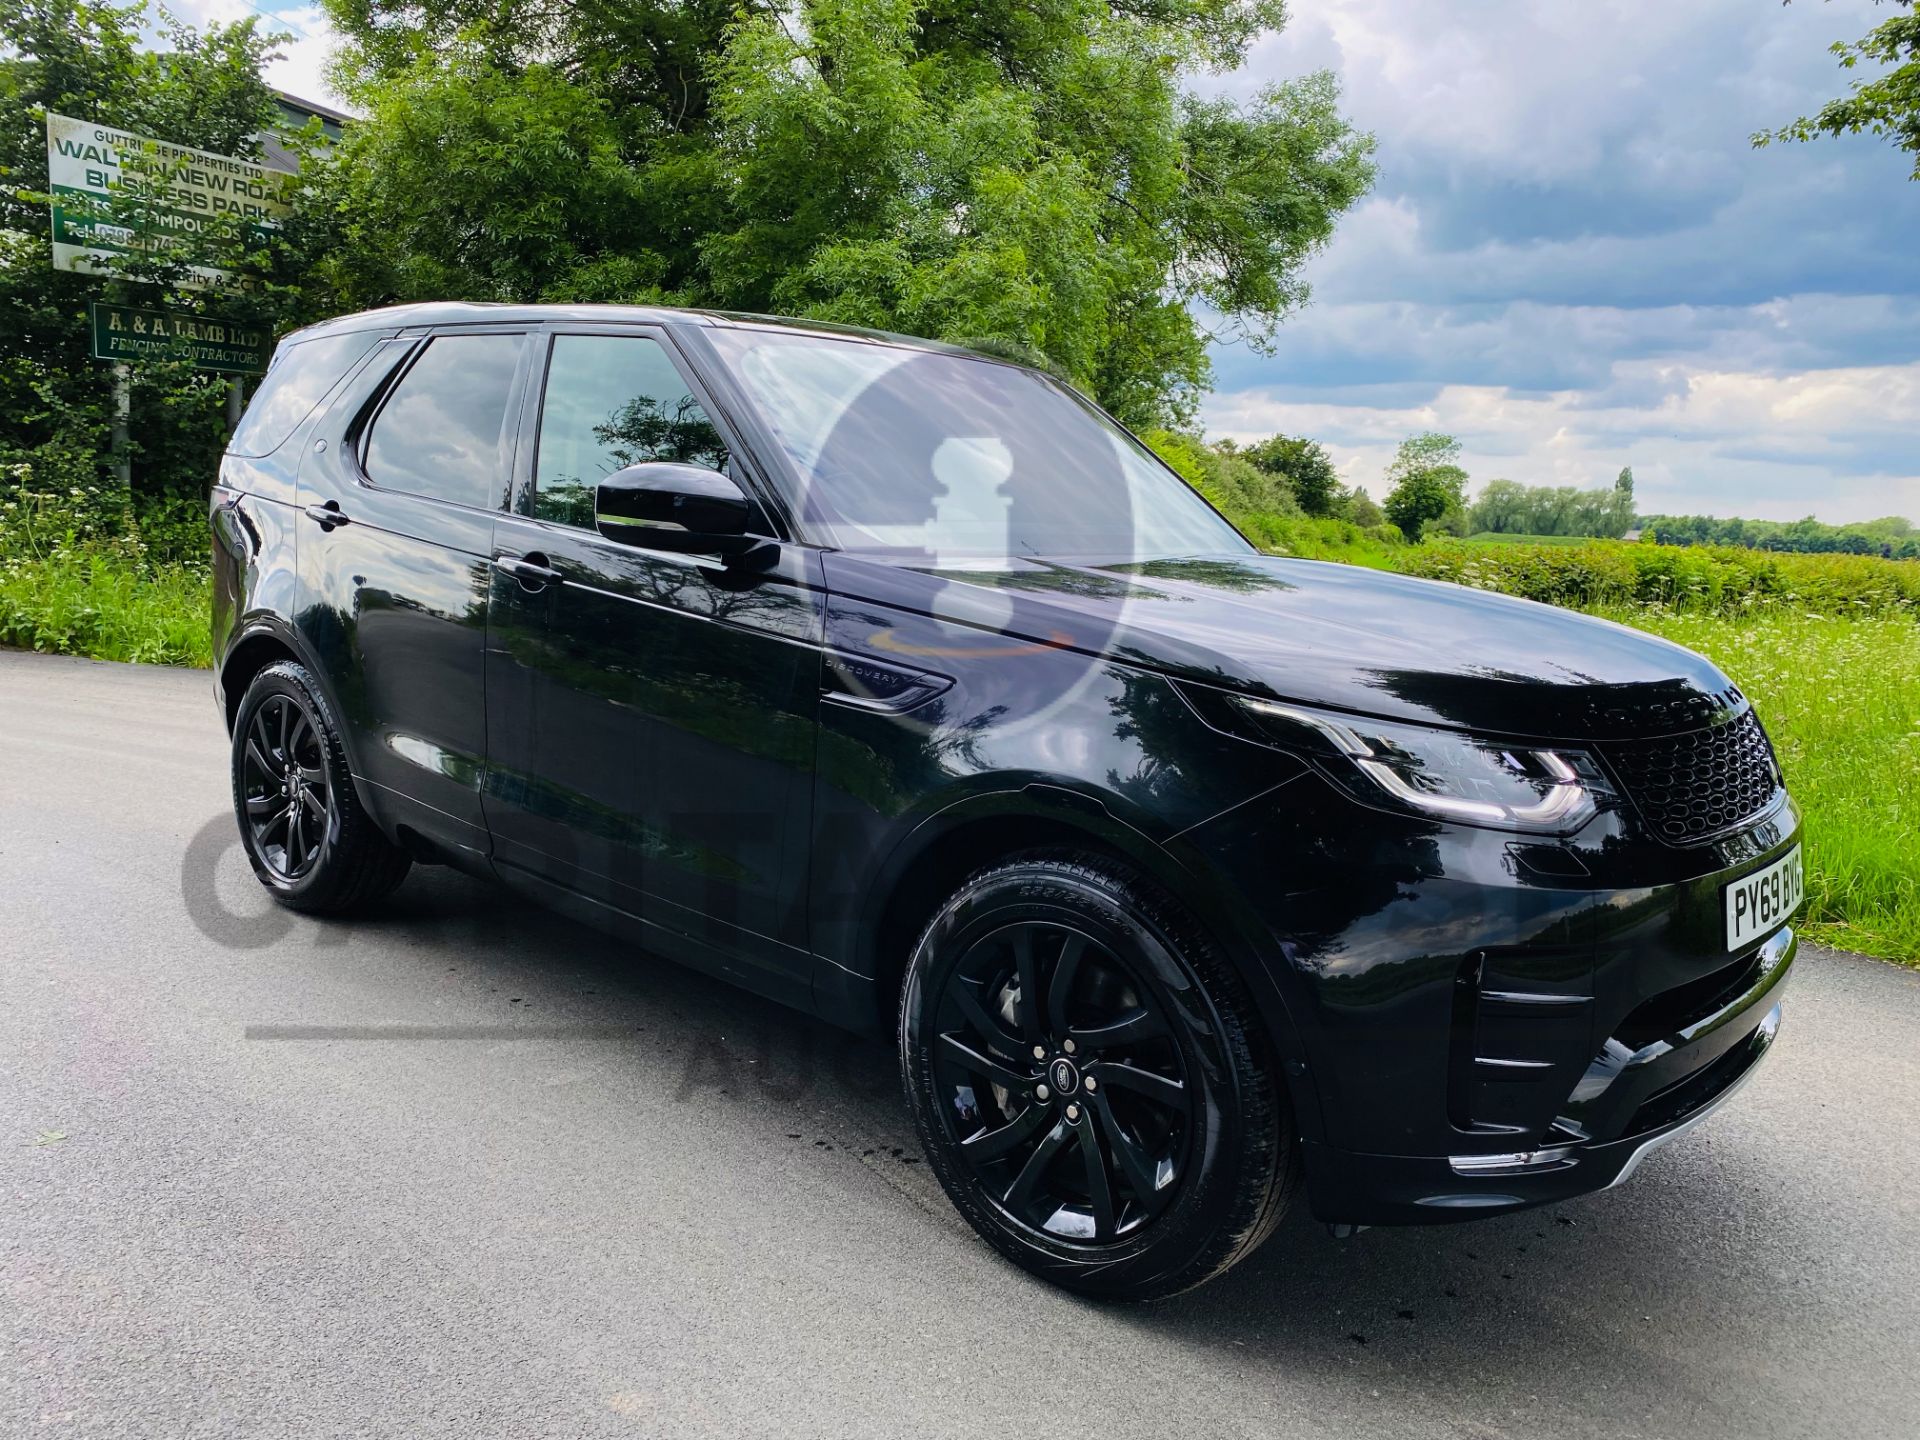 LAND ROVER DISCOVERY 5 *LANDMARK* 7 SEATER SUV (2020 - EURO 6) 3.0 SD6 - 8 SPEED AUTO *FULLY LOADED* - Image 3 of 63